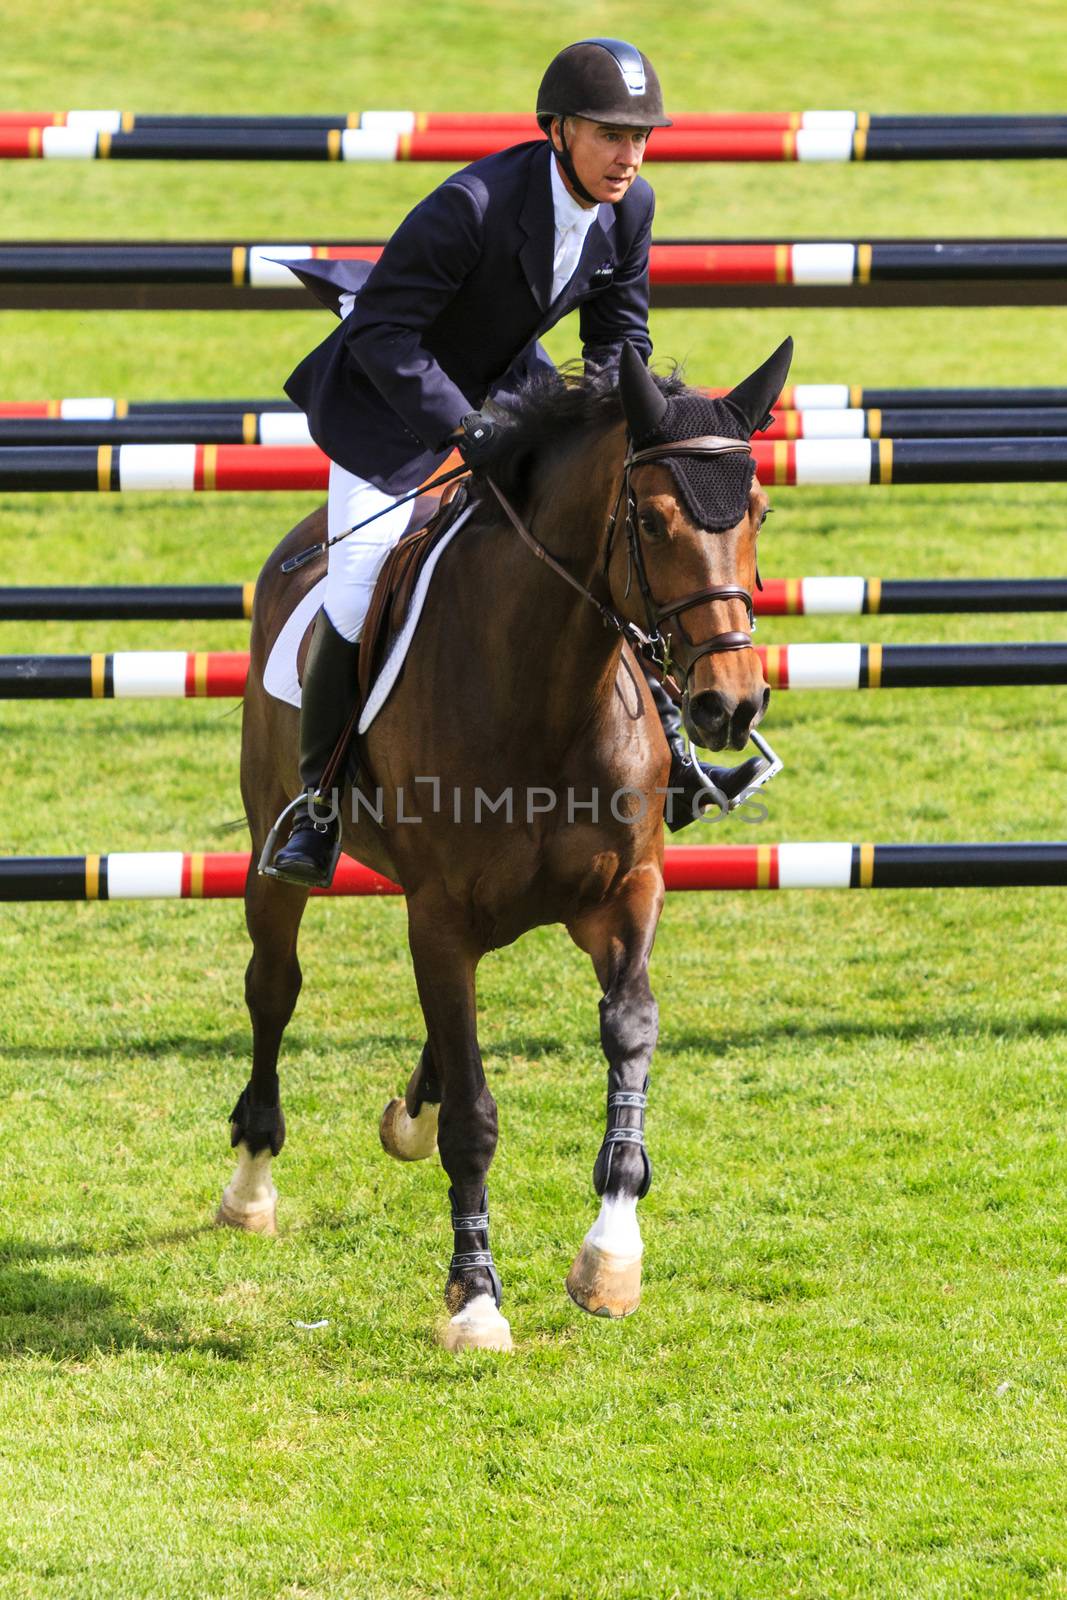 Spruce Meadows International hors jumping competition, by Imagecom